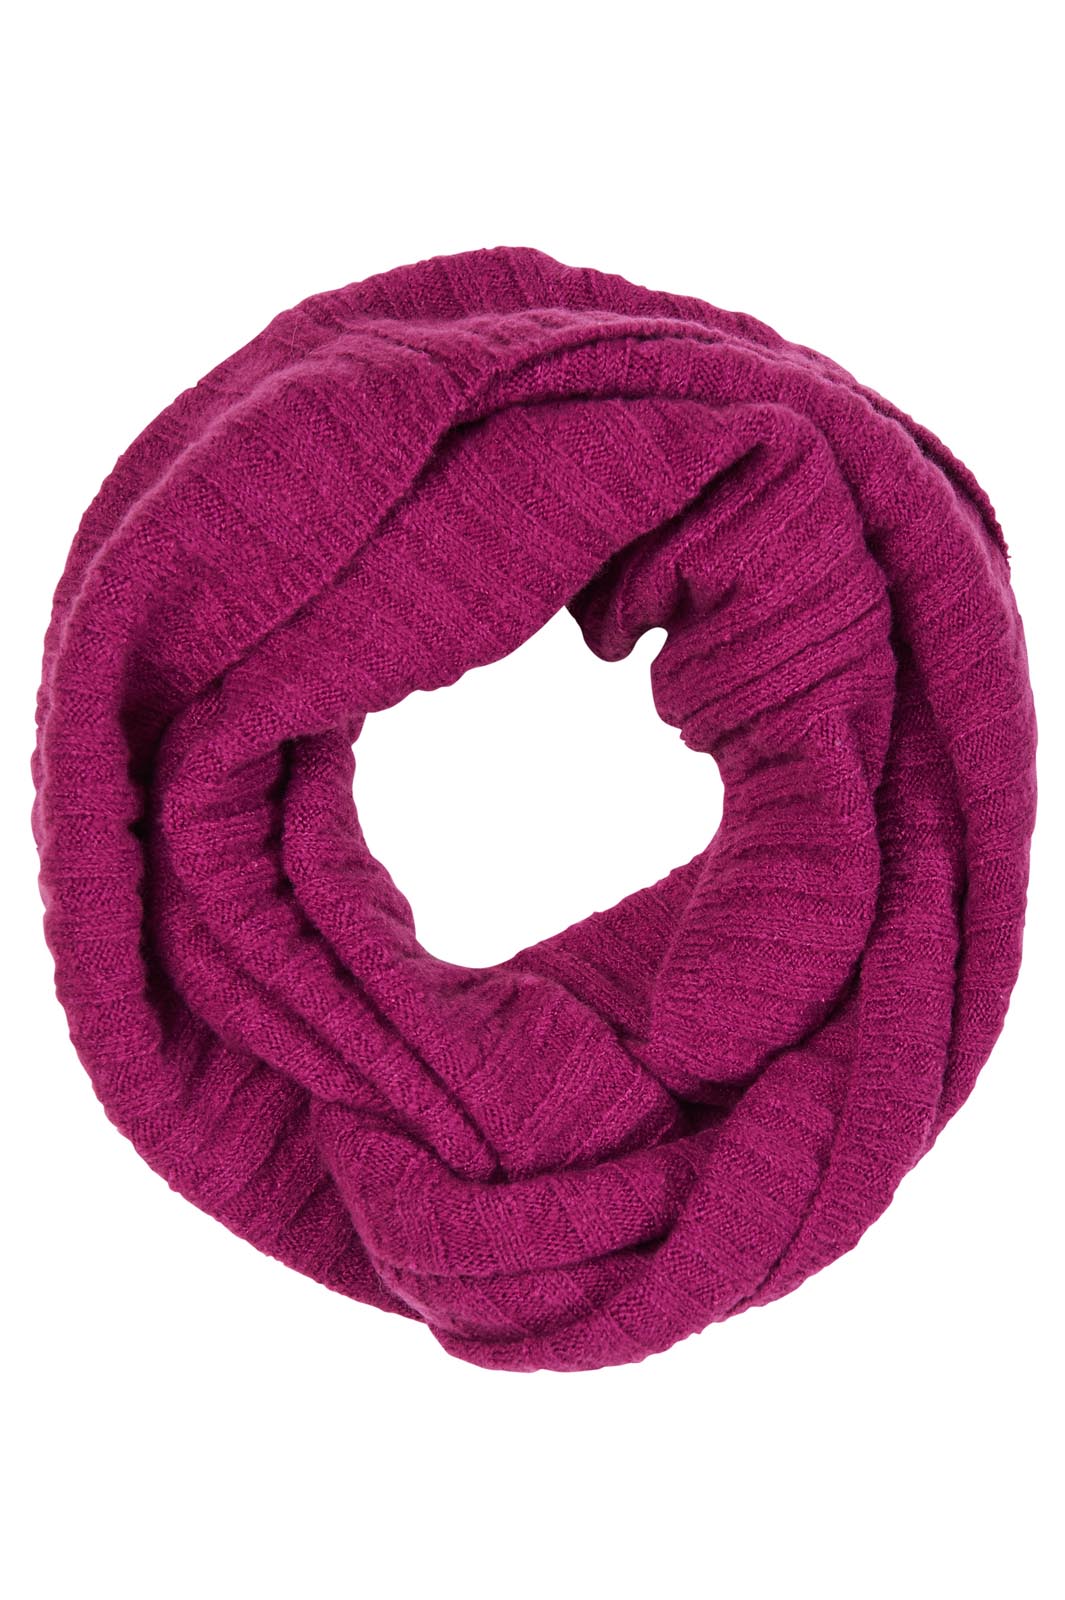 Vienetta Snood - Mulberry - eb&ive Scarves